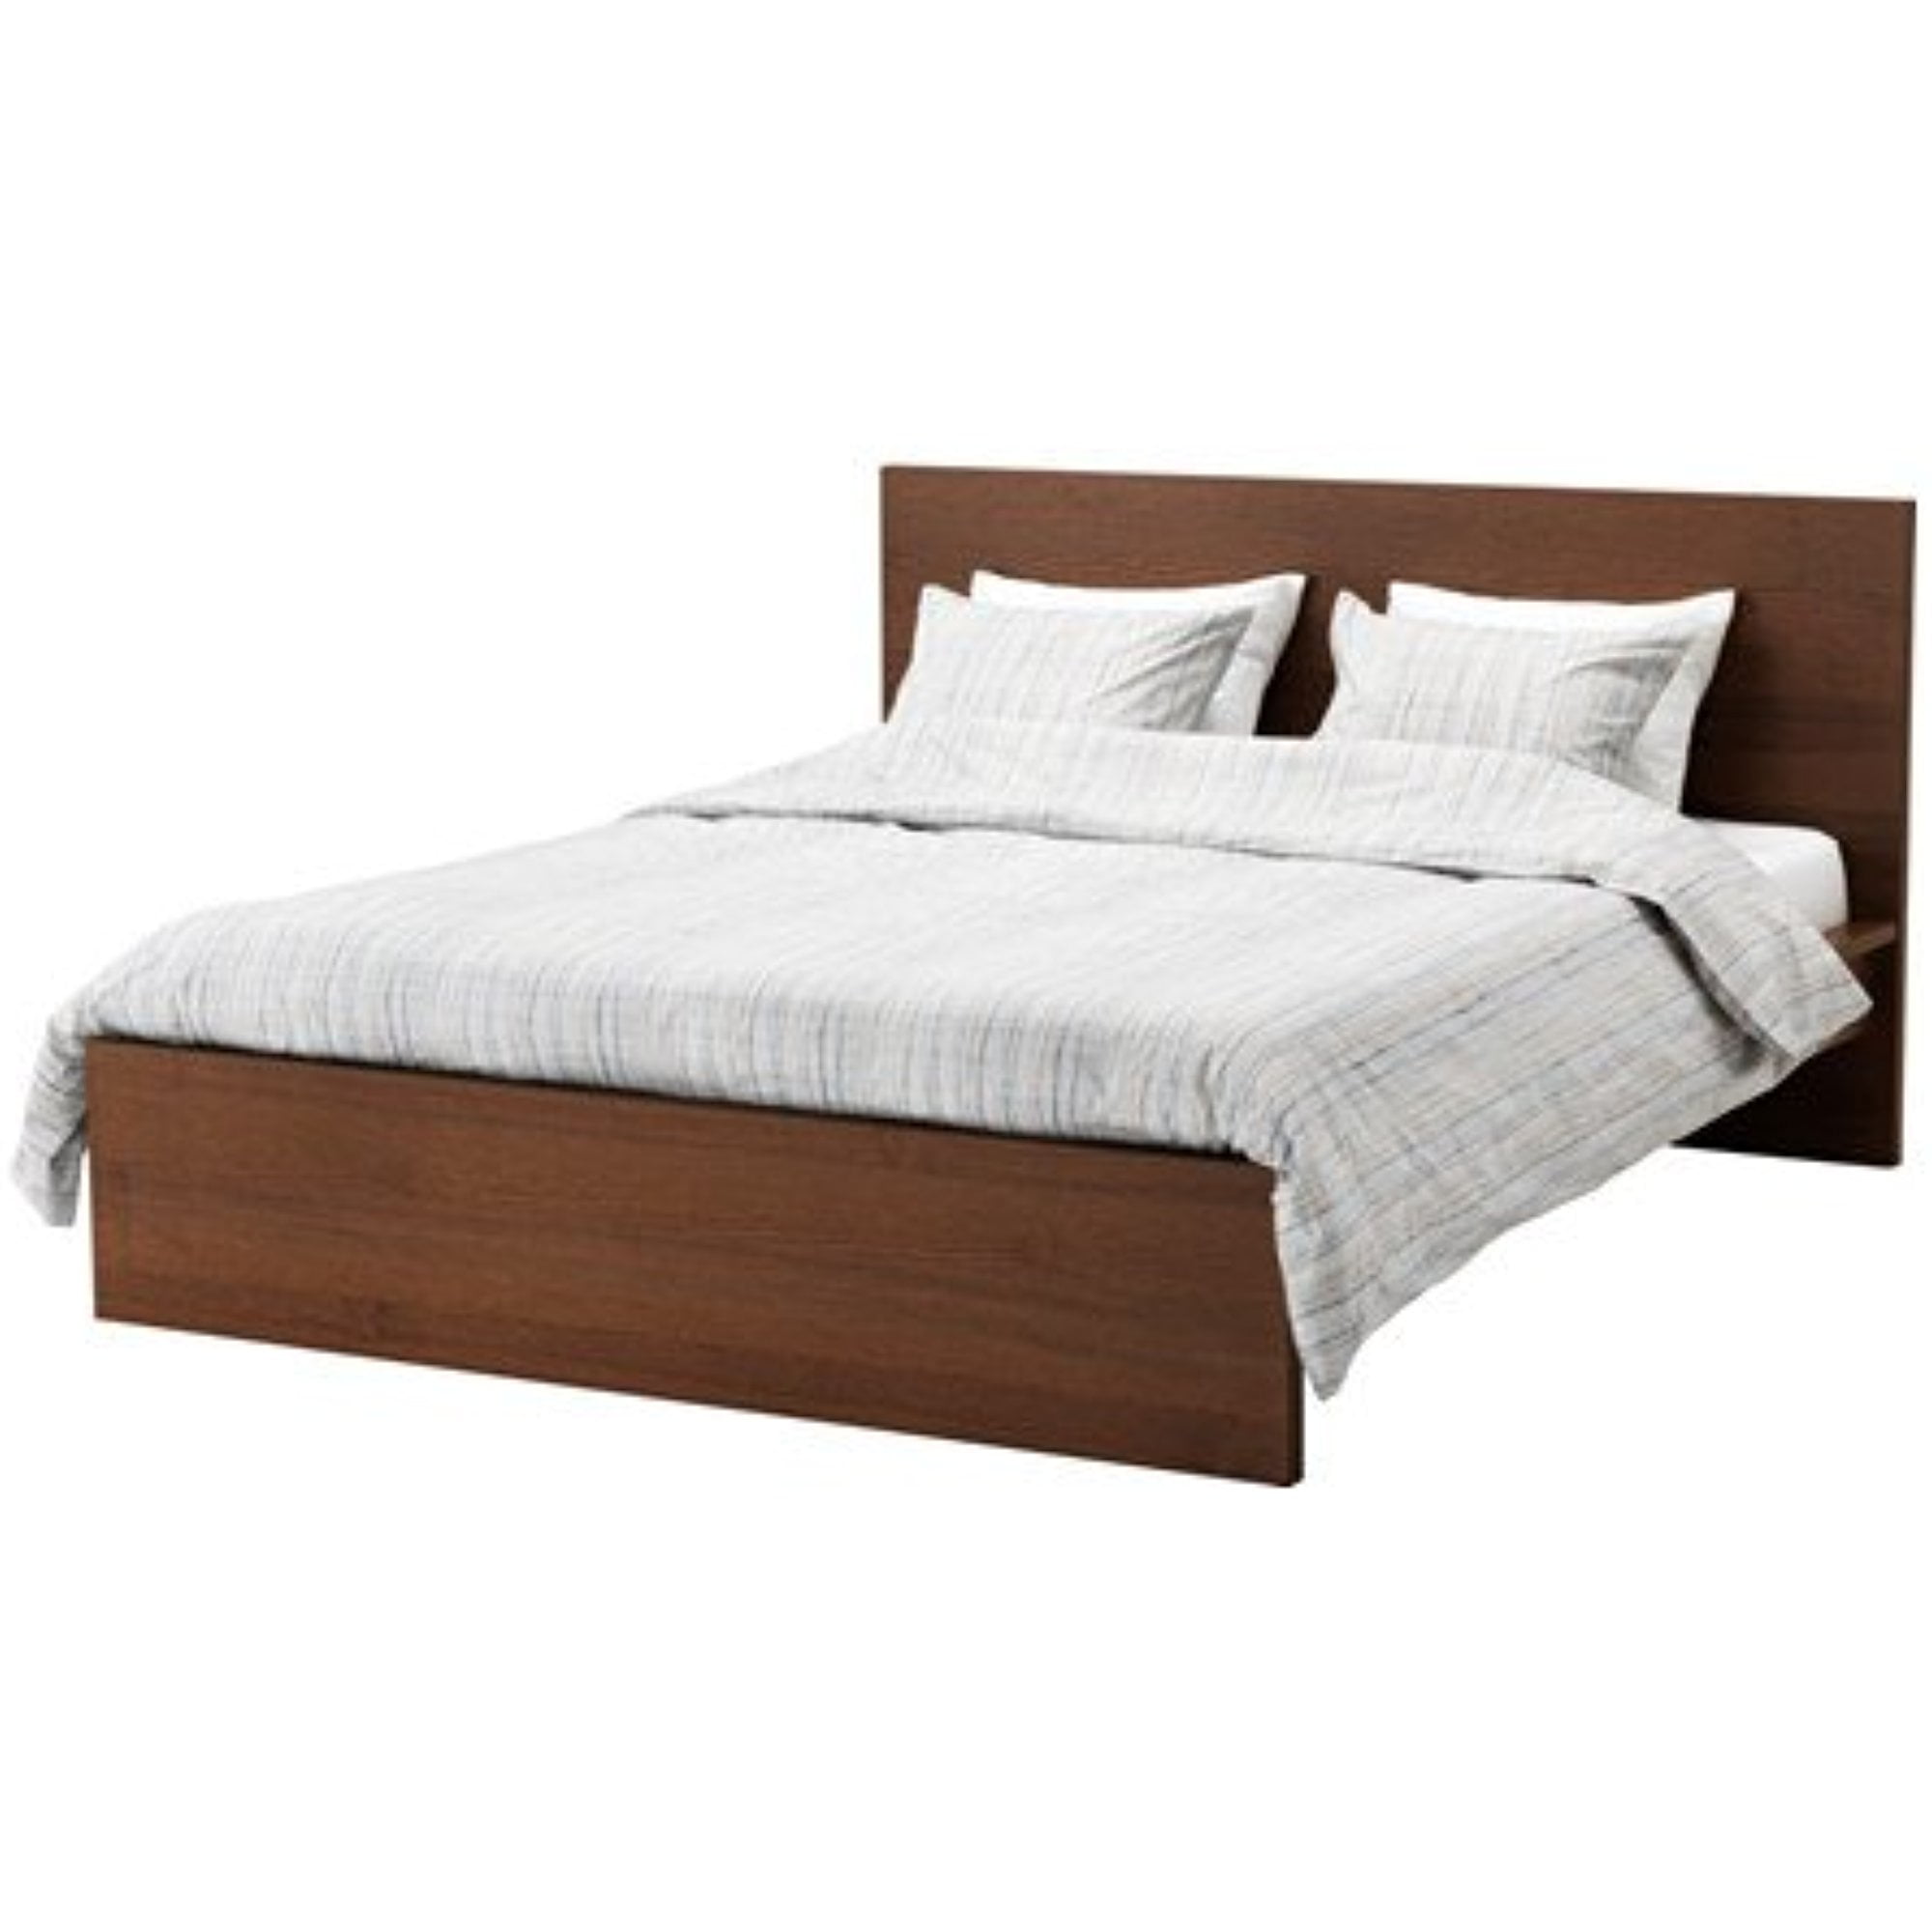 Ikea Queen Size Bed Frame High Brown Stained Ash Veneer Leirsund